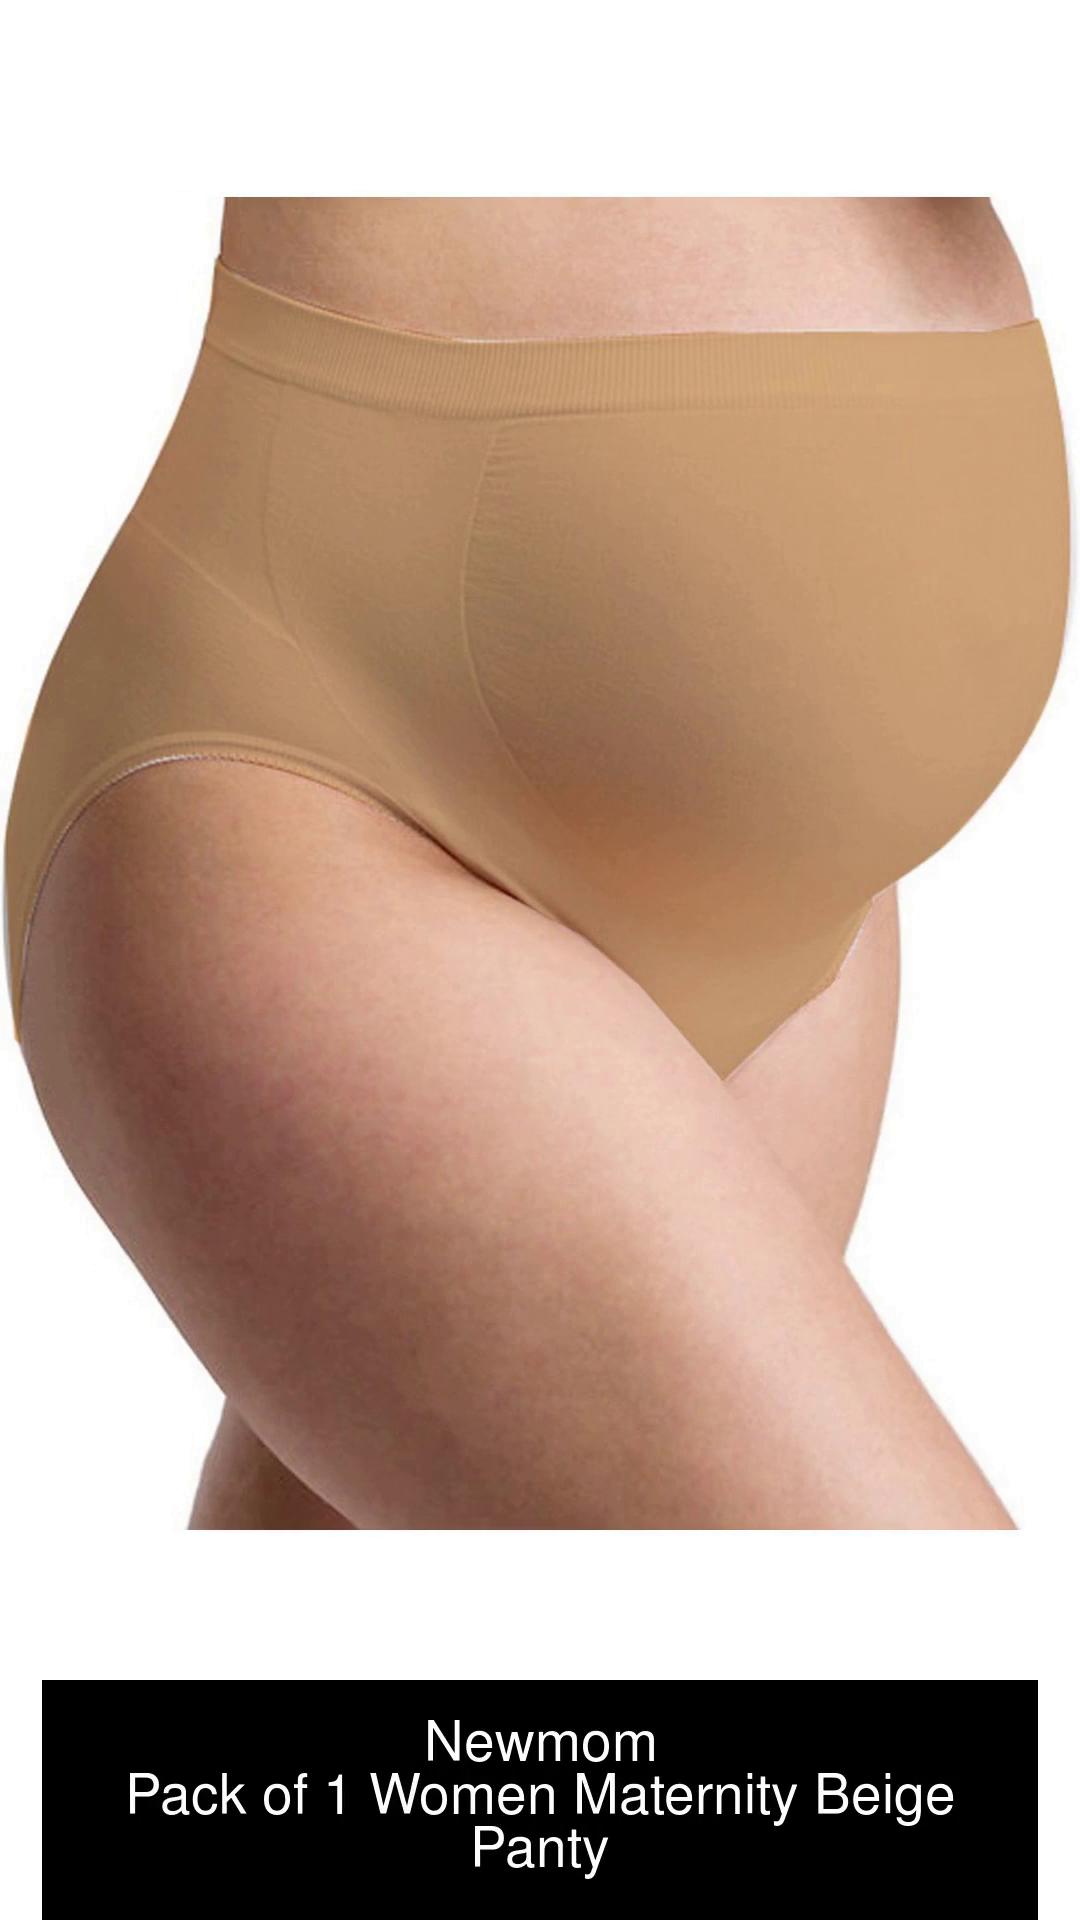 Buy Newmom Women Maternity Beige Panty Online at Best Prices in India